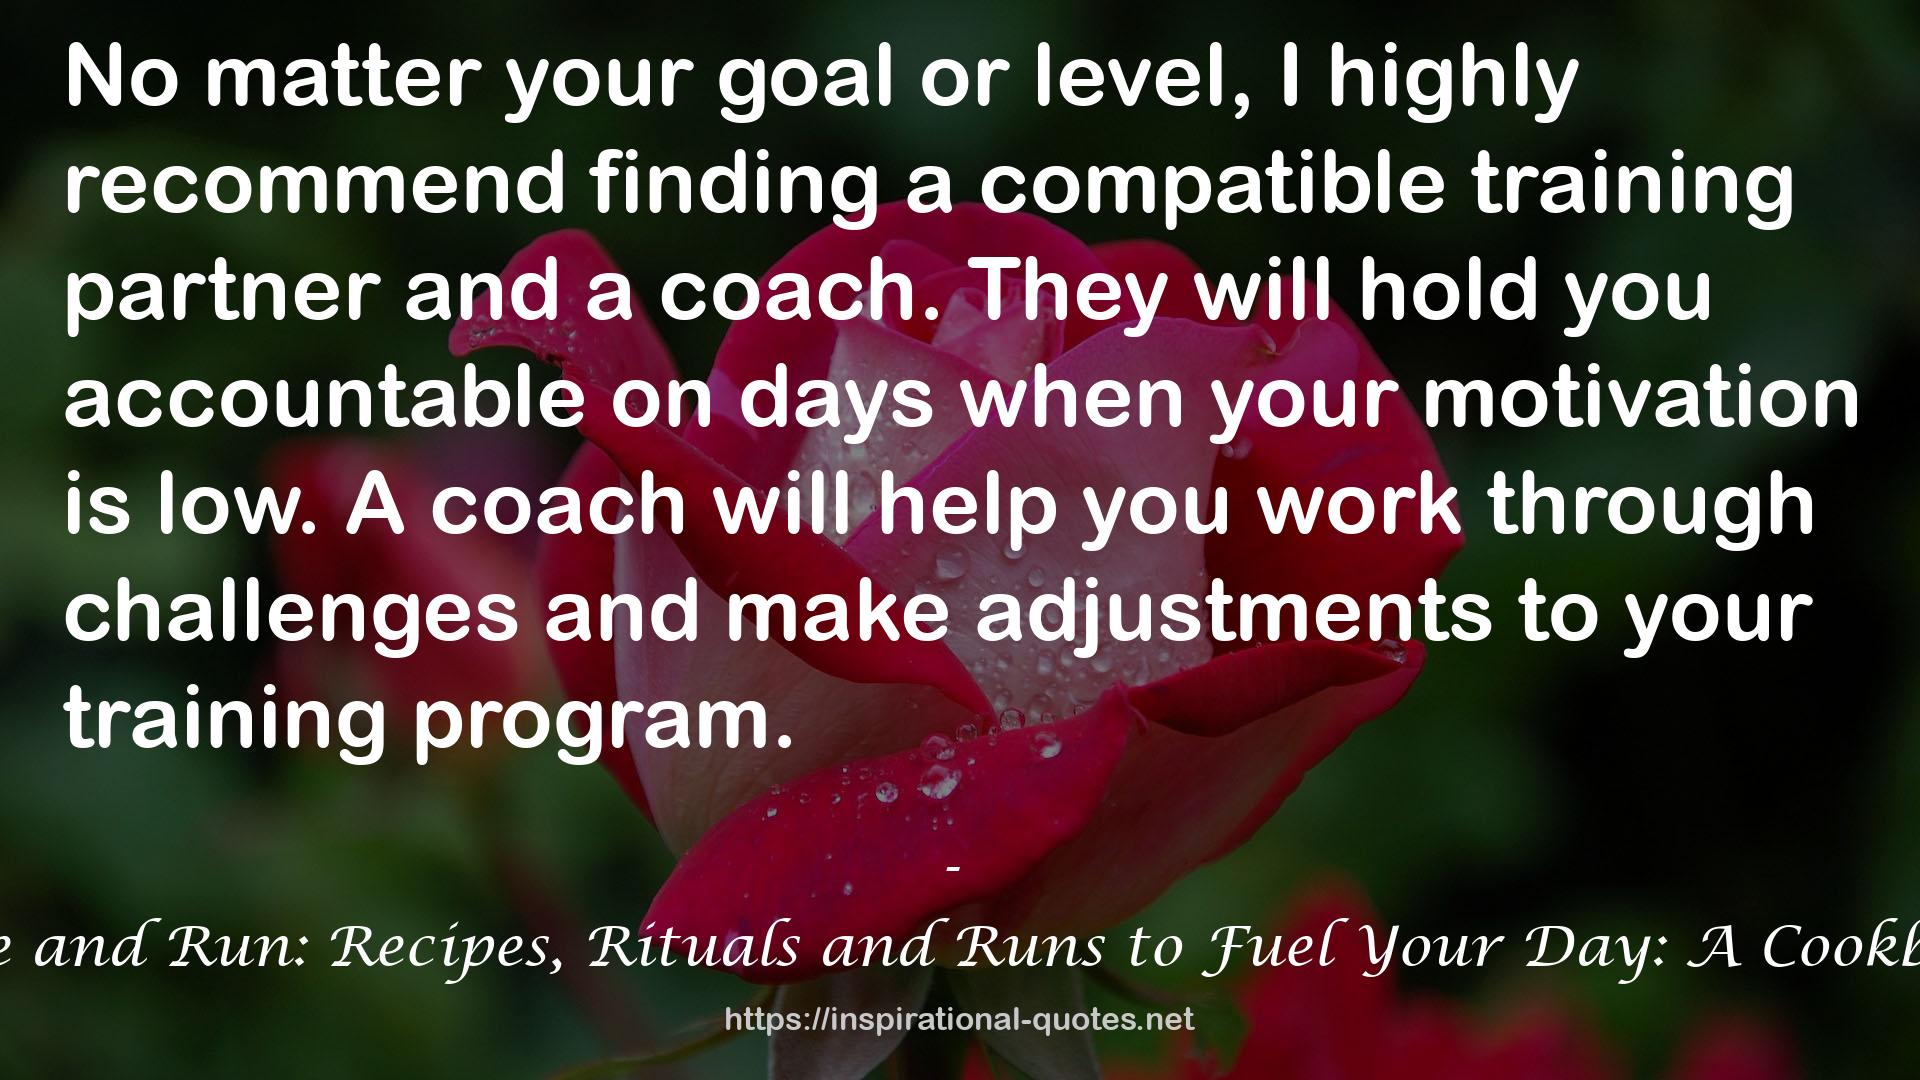 Rise and Run: Recipes, Rituals and Runs to Fuel Your Day: A Cookbook QUOTES